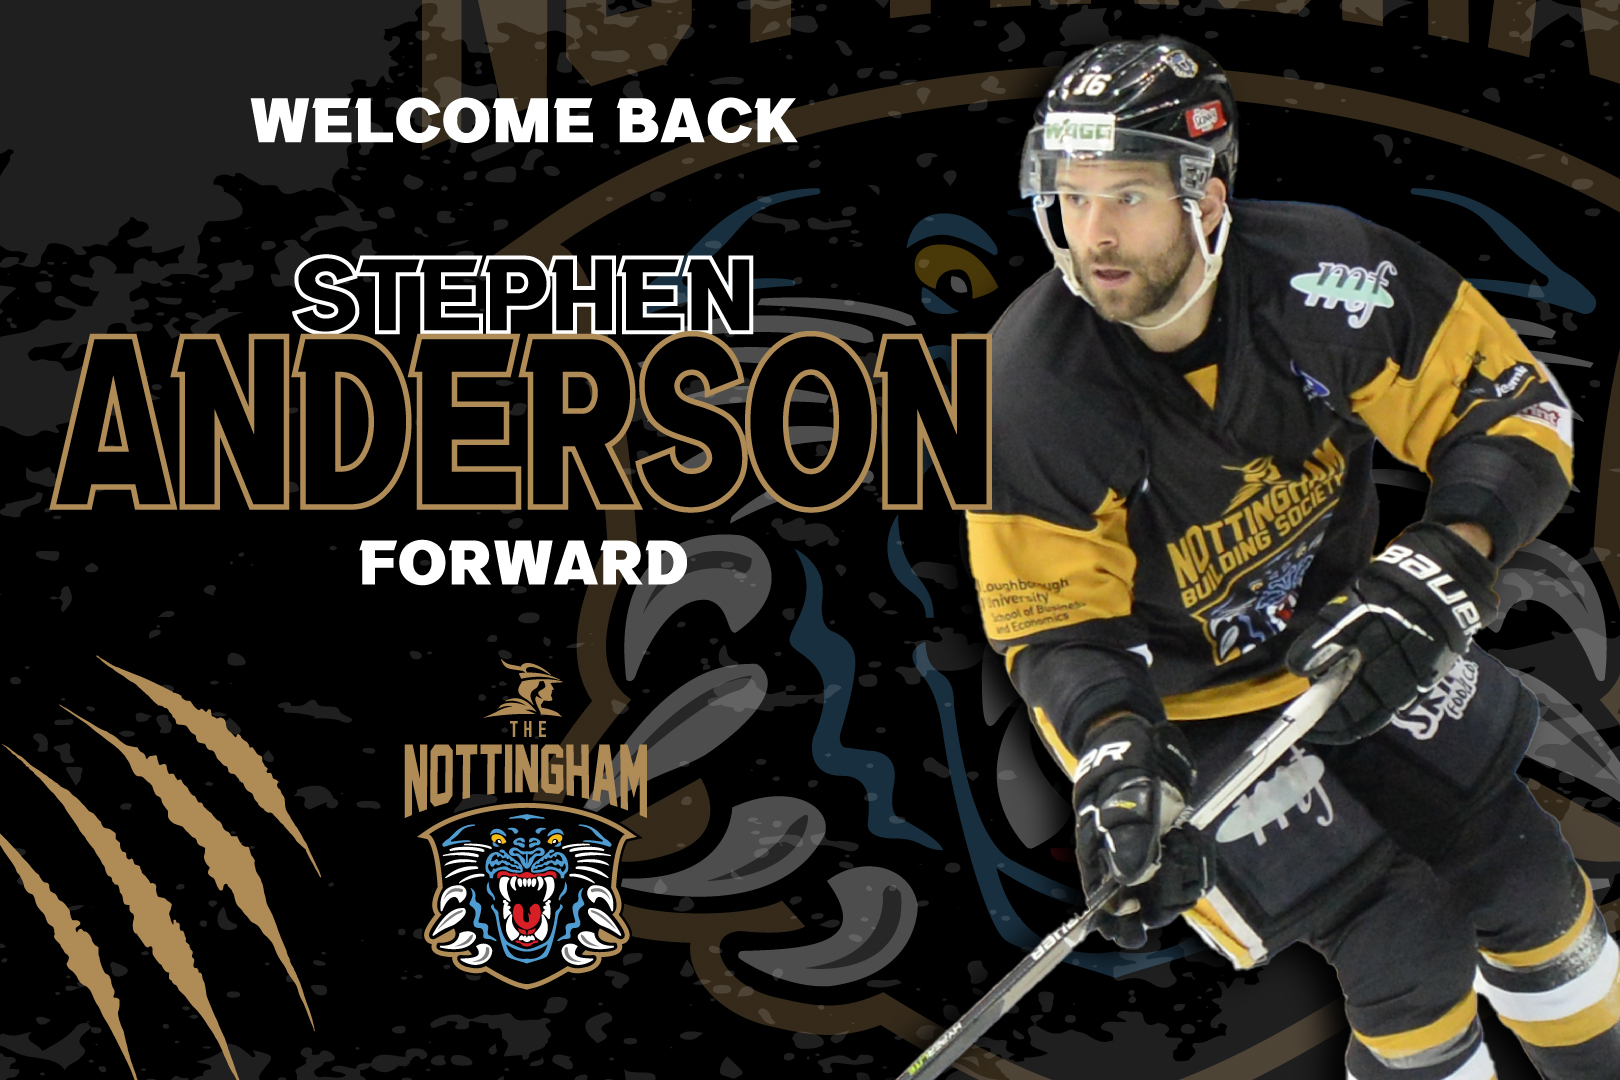 ANDERSON RETURNS FOR SECOND SEASON Top Image